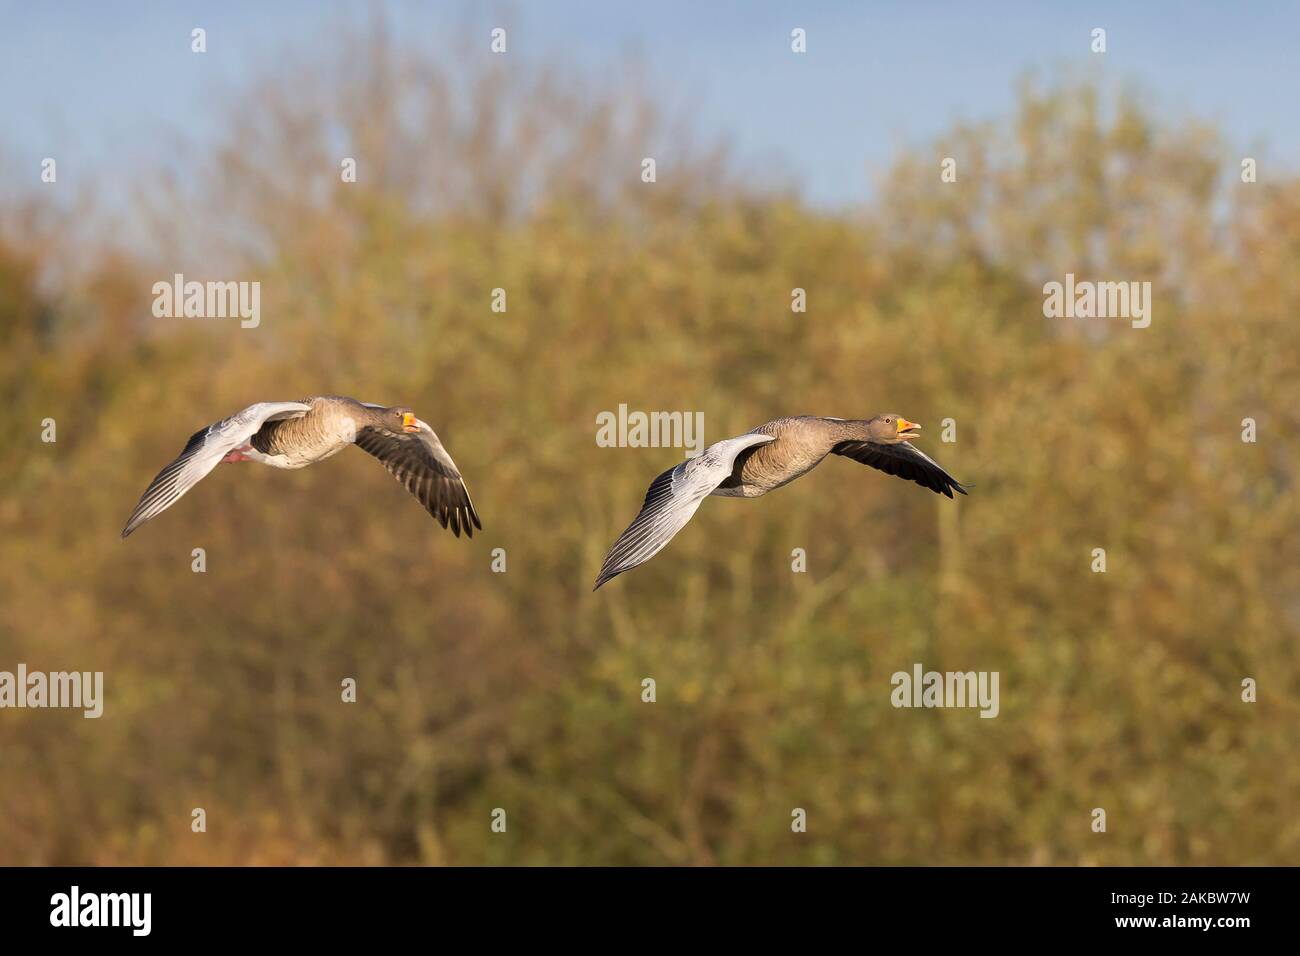 Wild UK greylag geese (Anser anser) isolated in midair flight, two together. Greylag geese pair flying free at wetlands reserve in autumn sunshine. Stock Photo